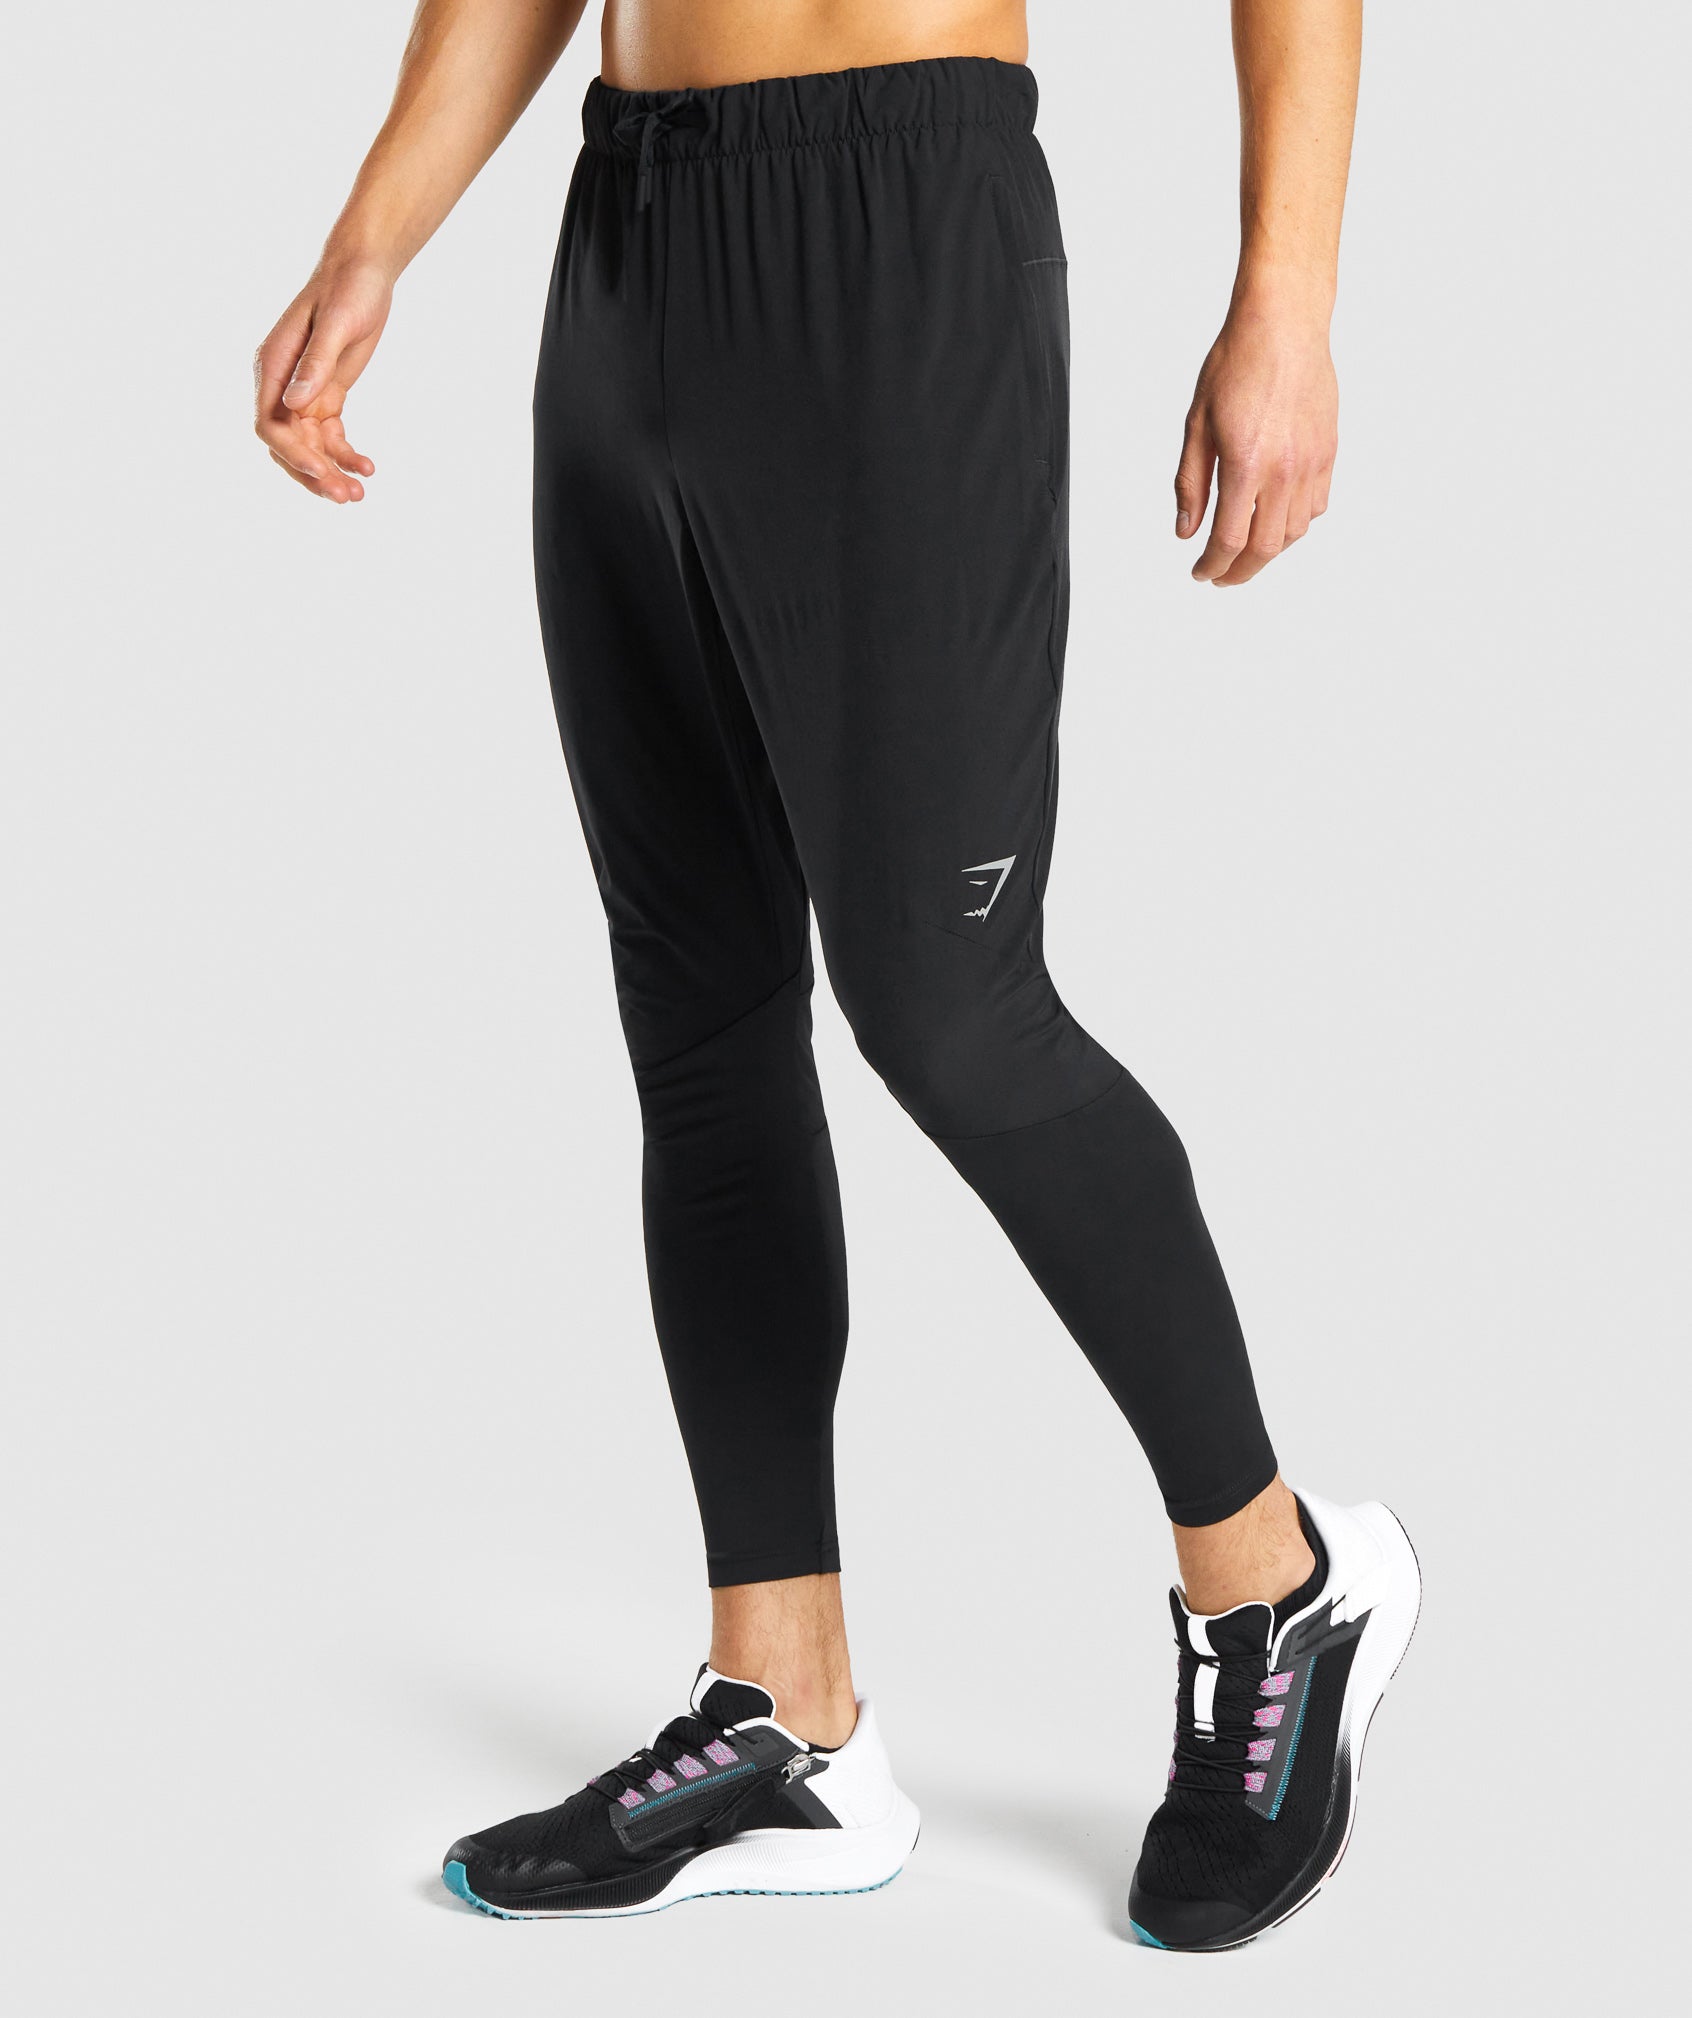 Speed Joggers in Black - view 1